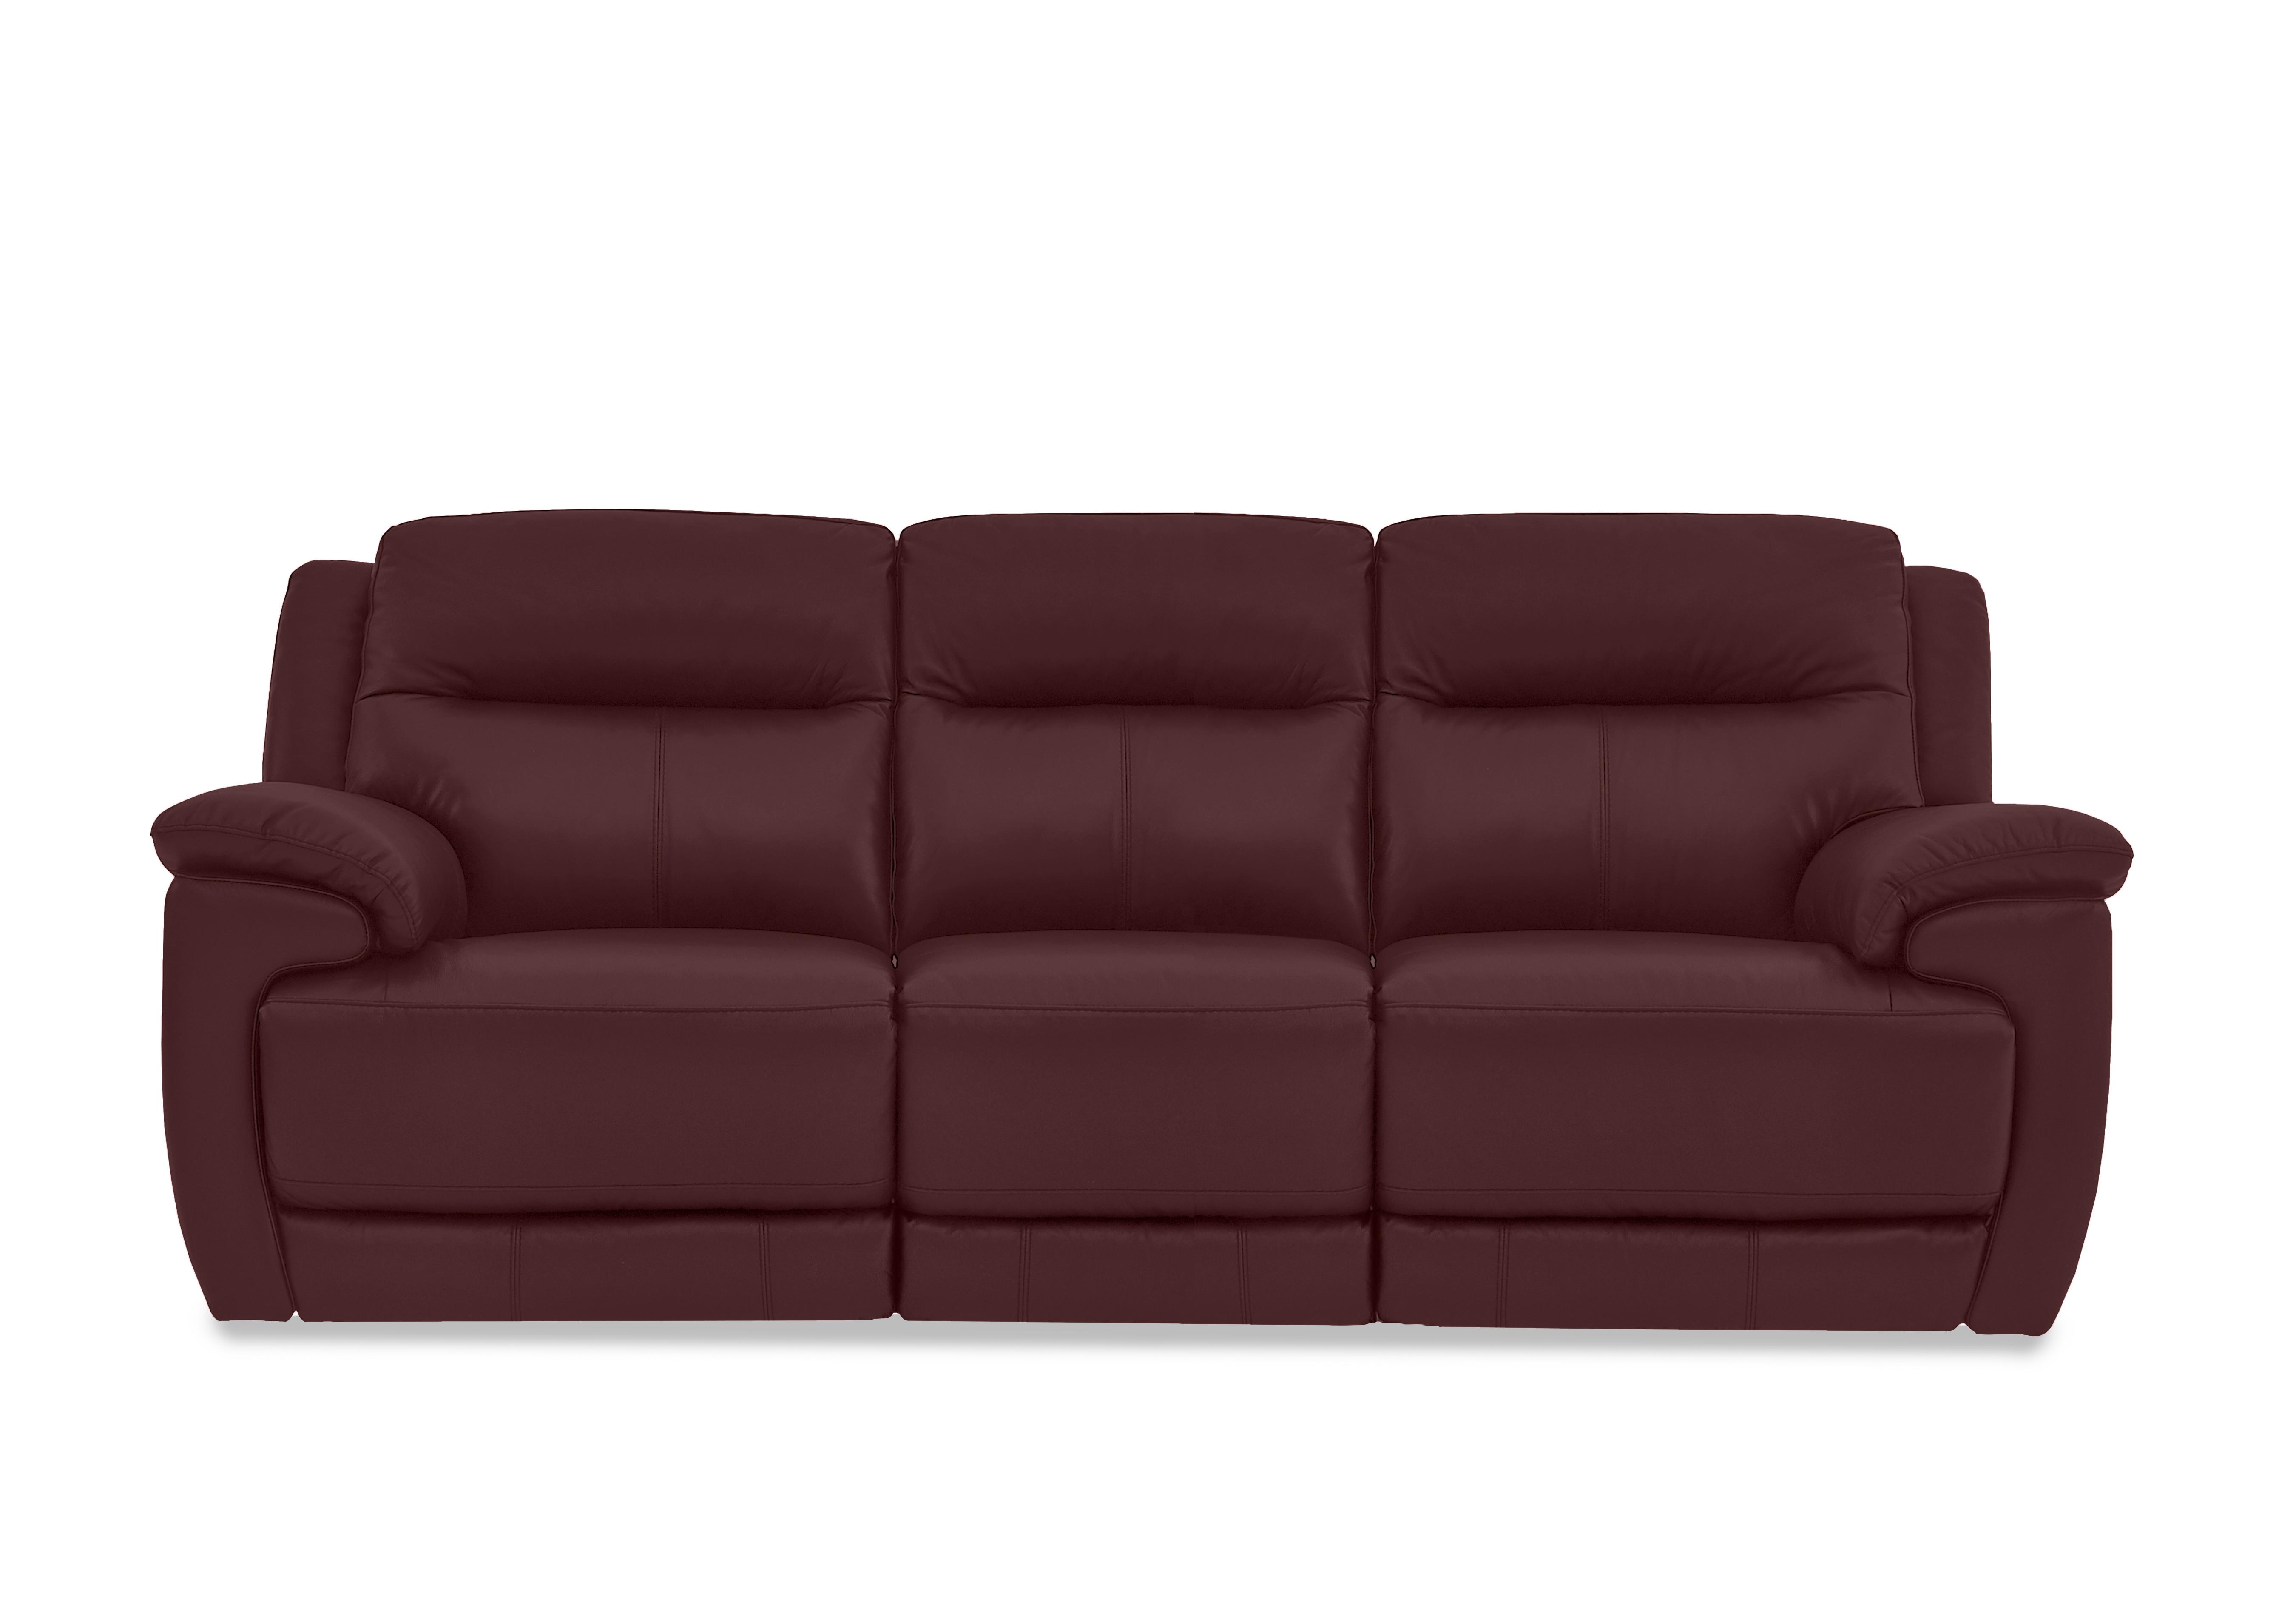 Touch 3 Seater Leather Sofa in Bv-035c Deep Red on Furniture Village